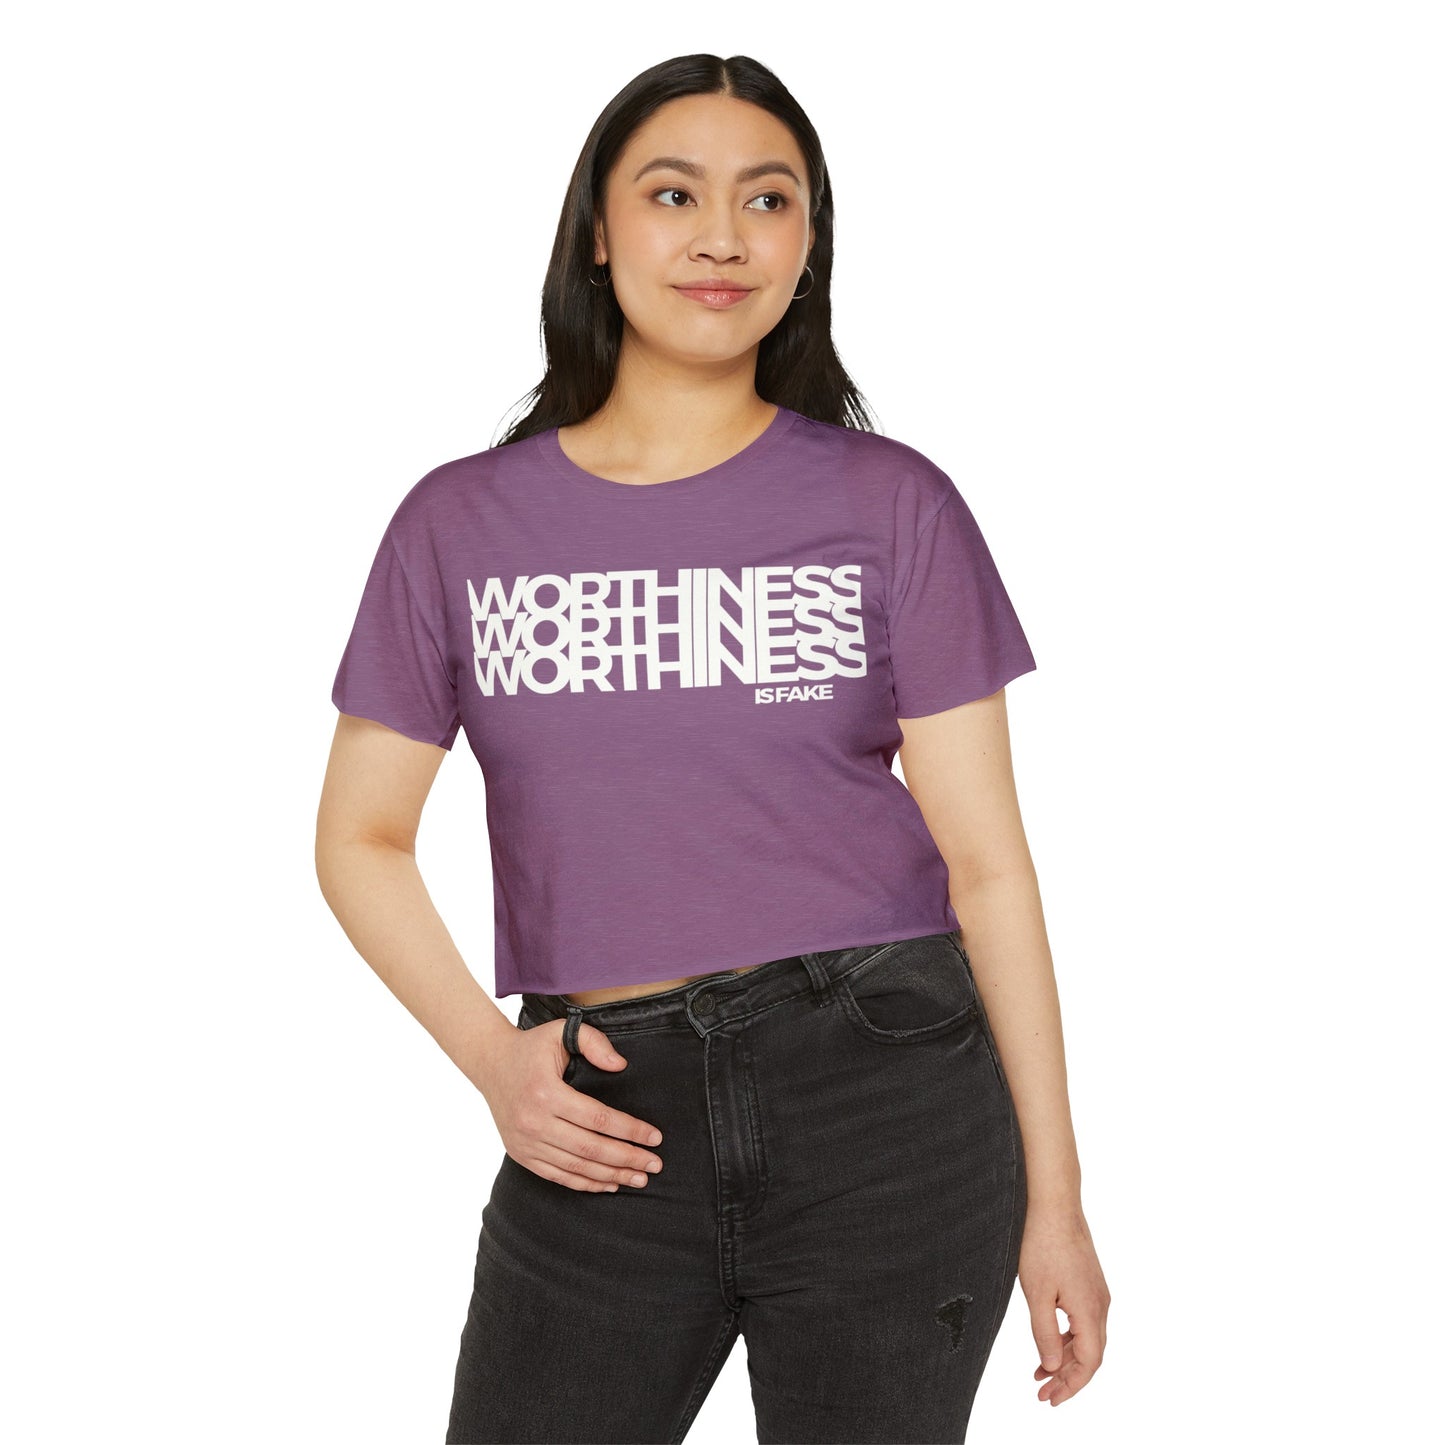 Worthiness Is Fake Crop Top